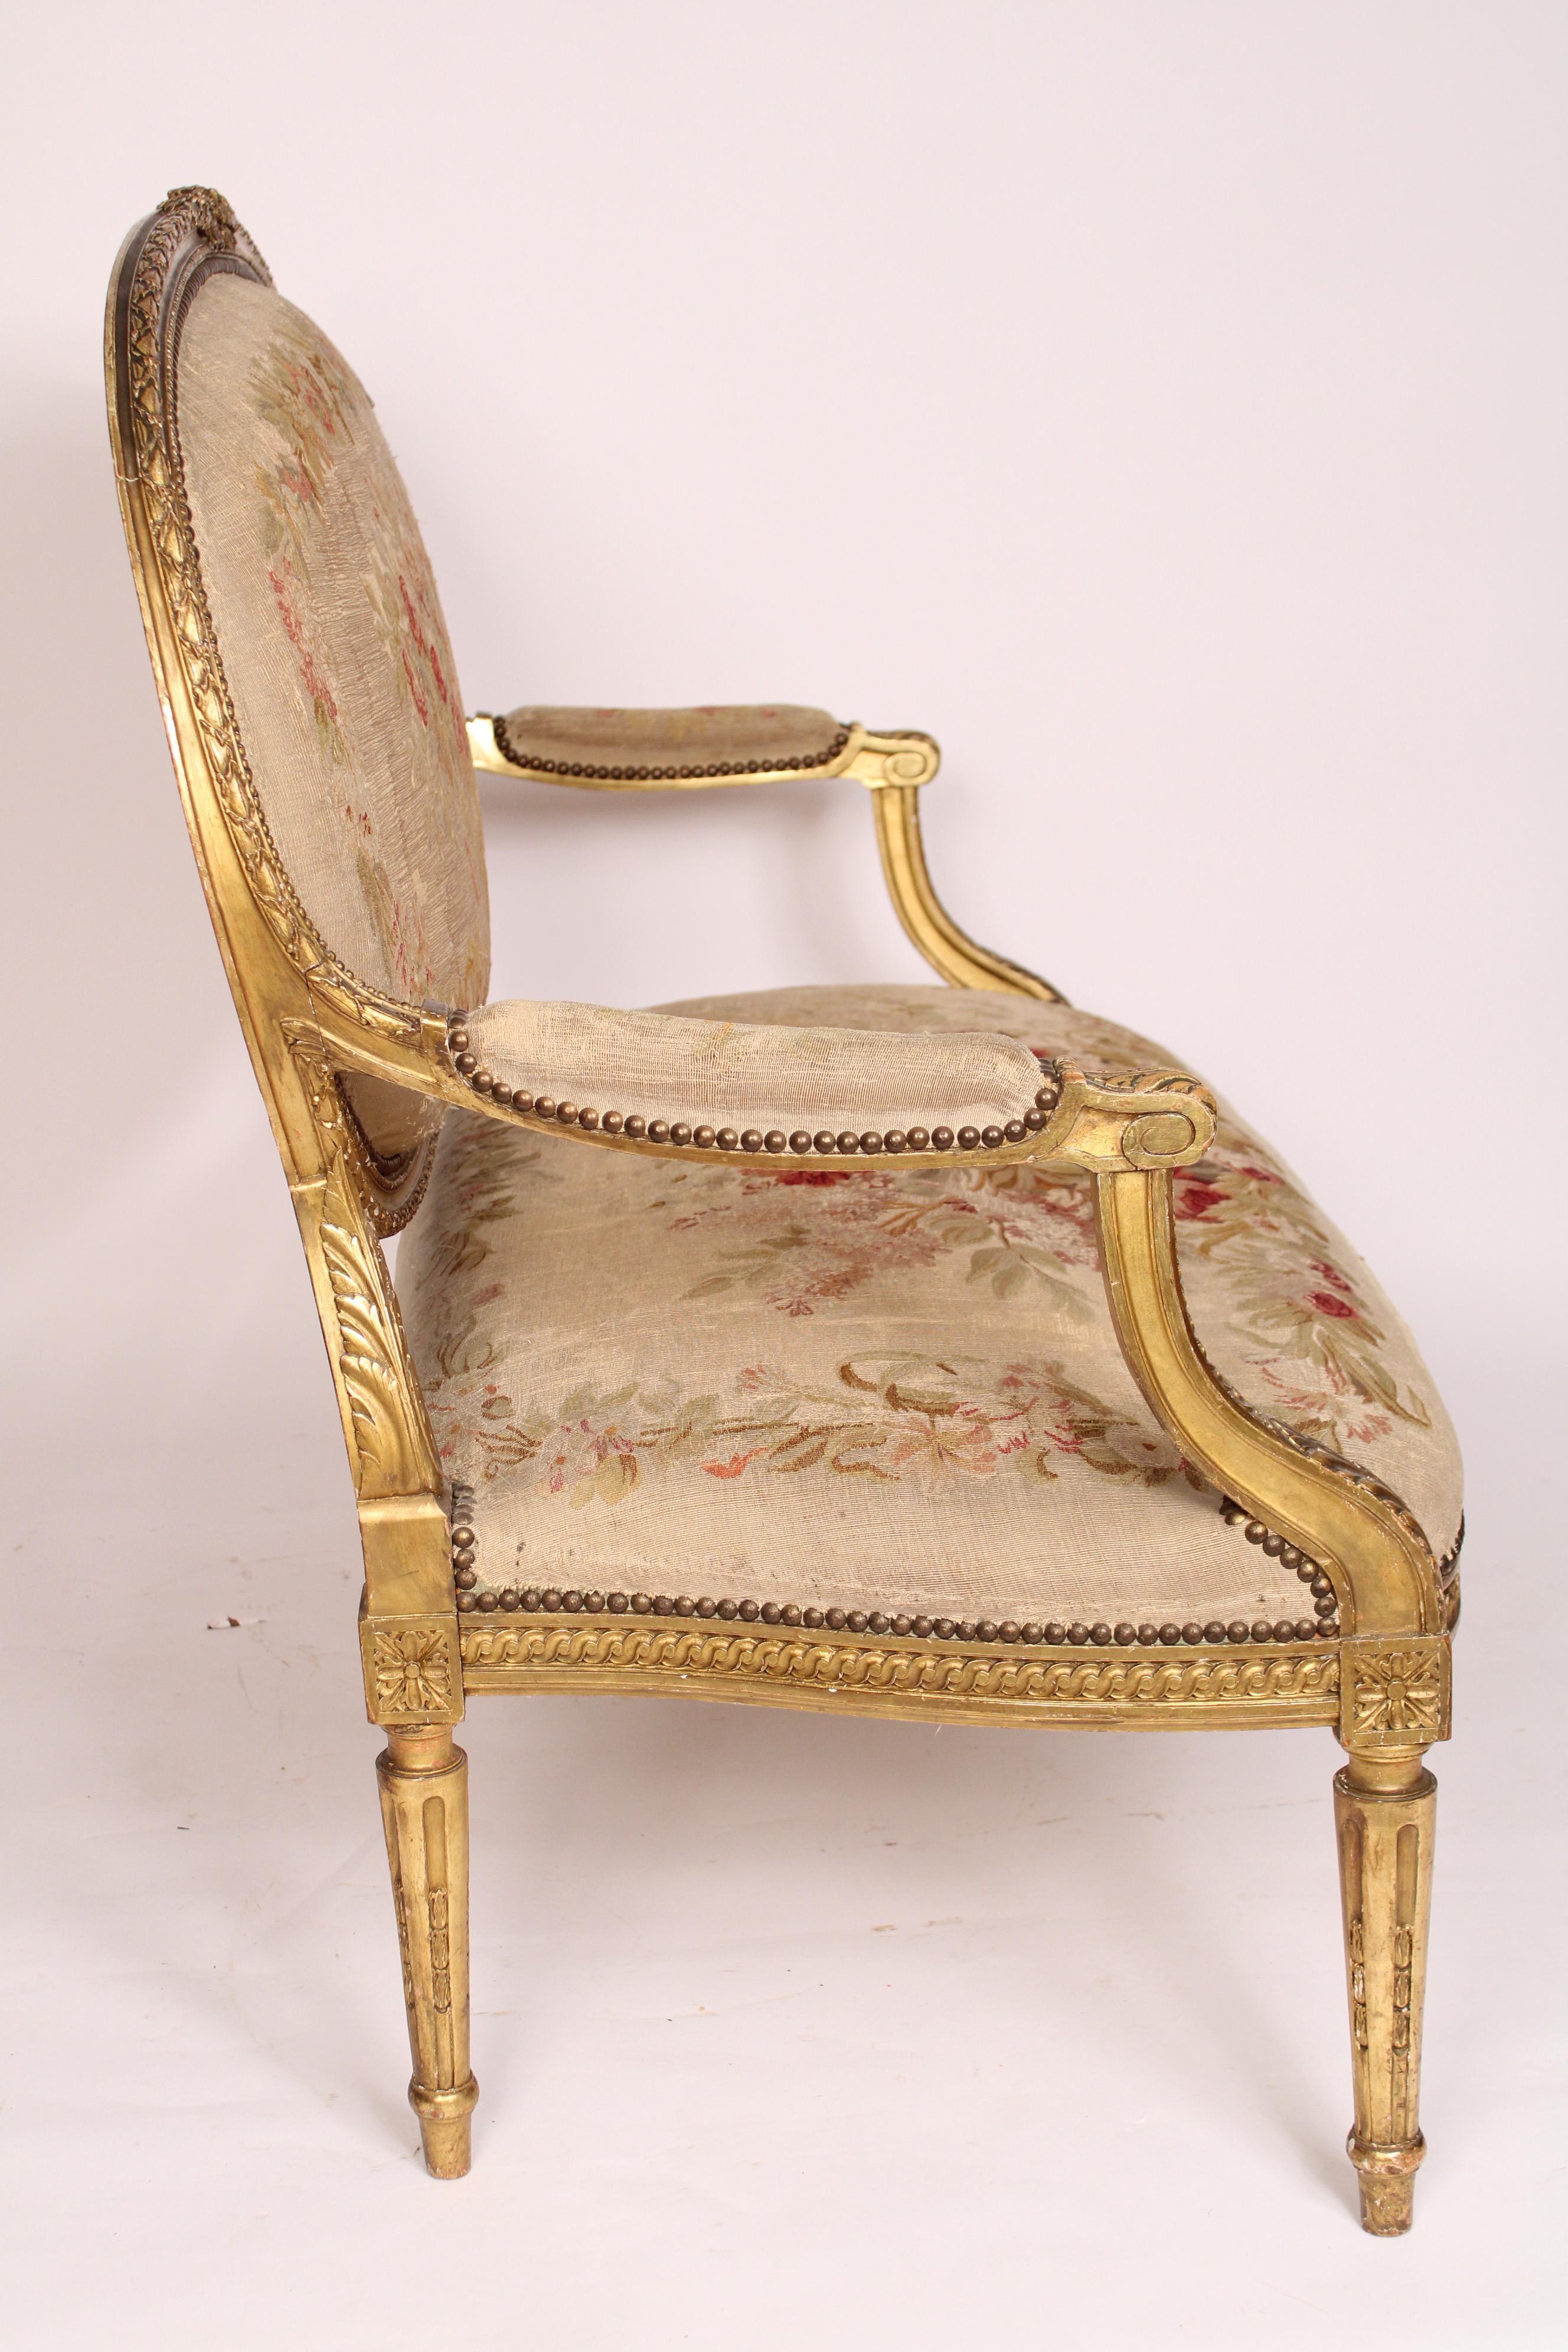 French Antique Louis XVI Style Gilt Wood Settee For Sale